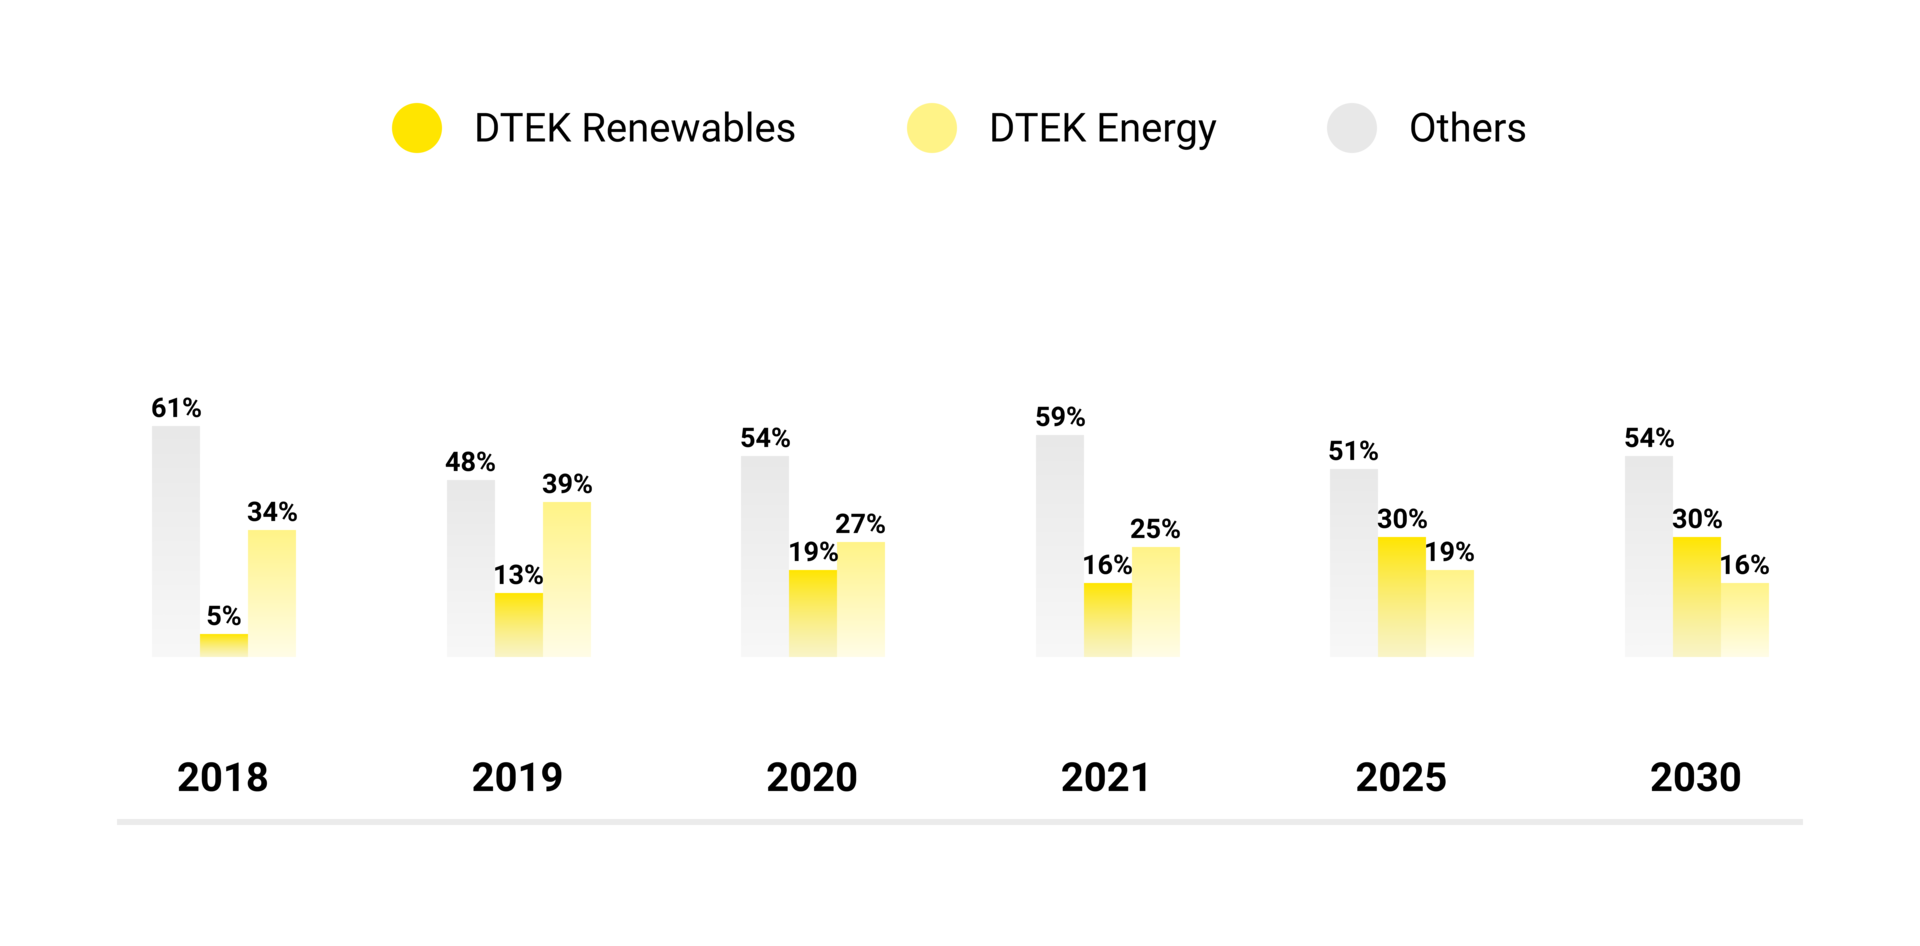 DTEK's strategic goal is to achieve carbon neutrality by 2040. Picture 3